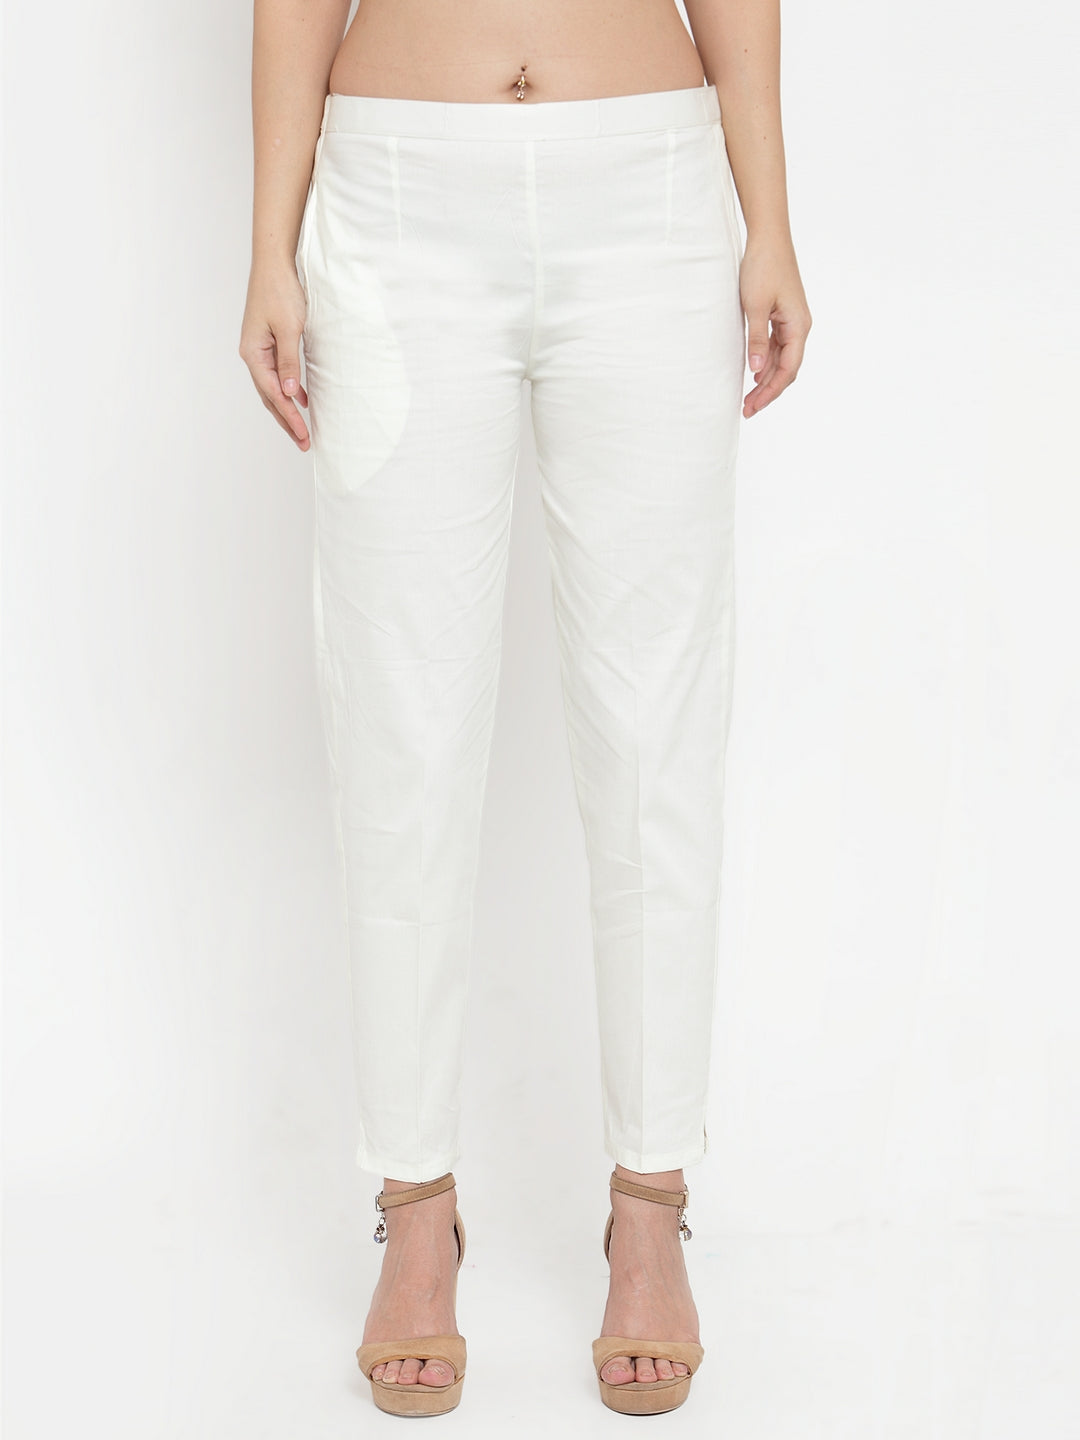 Buy Women White Regular Fit Solid Casual Trousers Online  733004  Allen  Solly